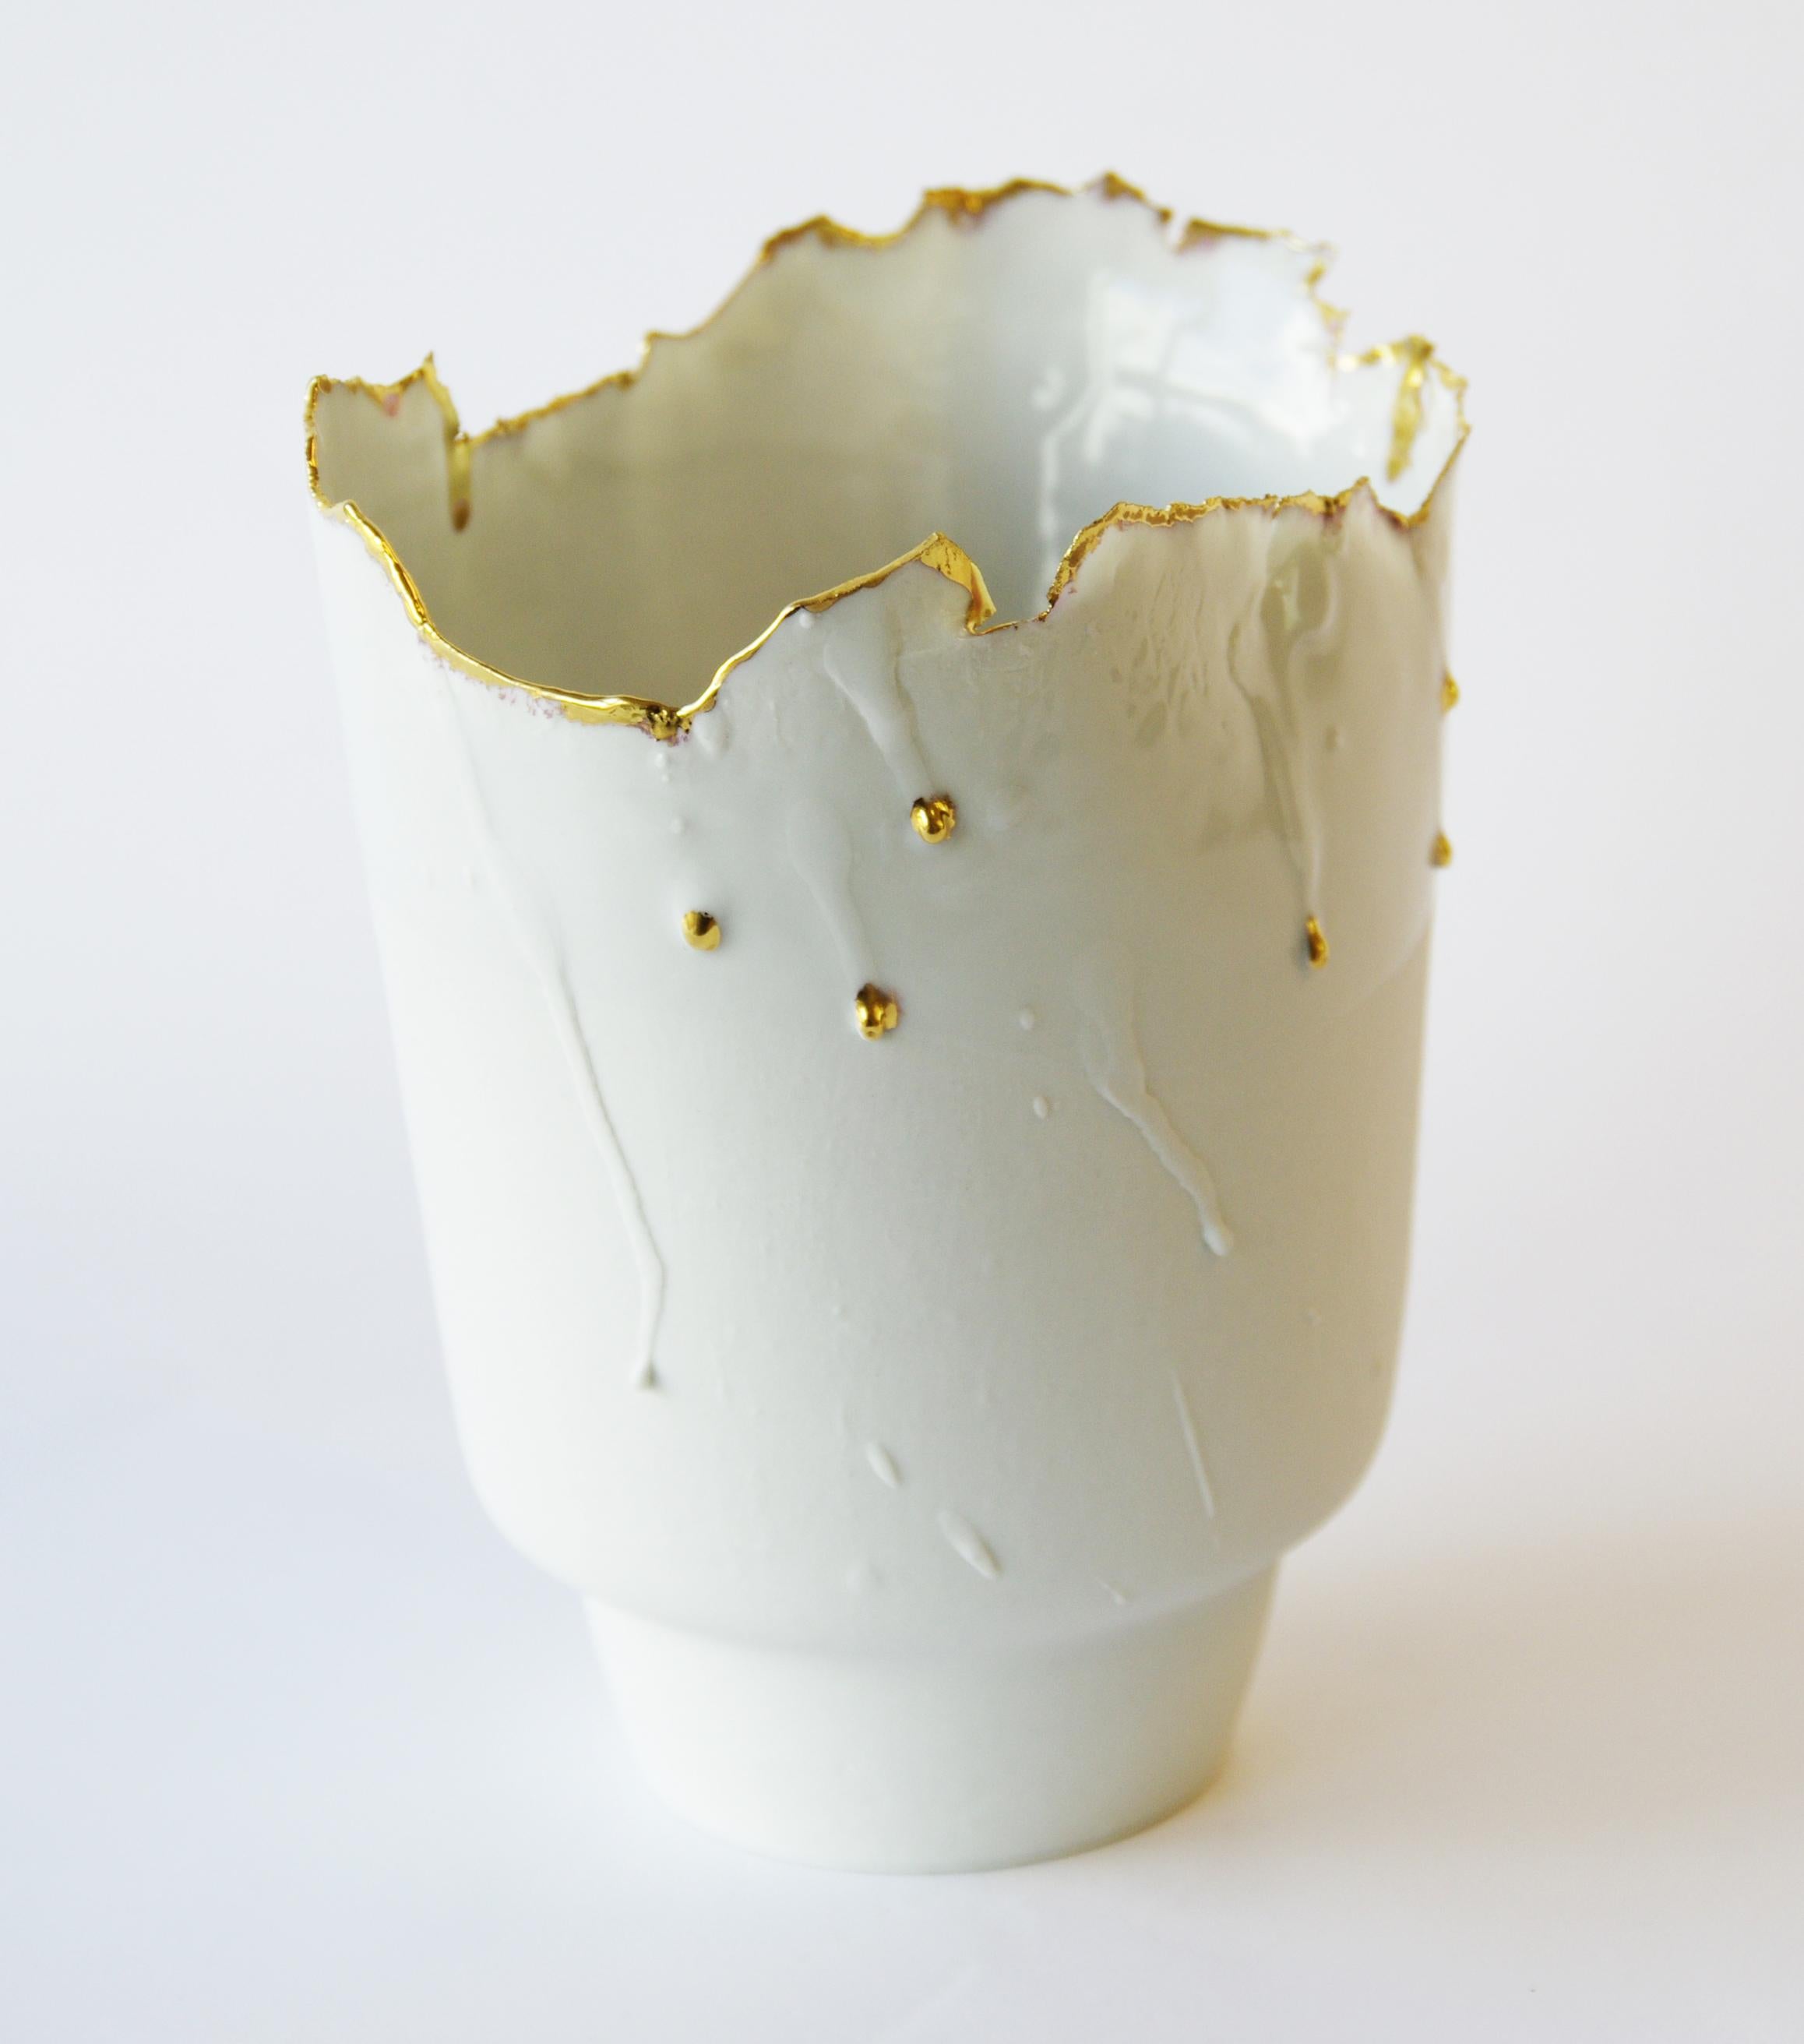 Porcelain and Gold Vase Big Imperfections by Dora Stanczel
One of a Kind.
Dimensions: D 13 x W 13 x H 16 cm.
Materials: Porcelain and gold.

I create bespoke and luxurious porcelain pieces with a careful aesthetic. Beyond the technical mastery of